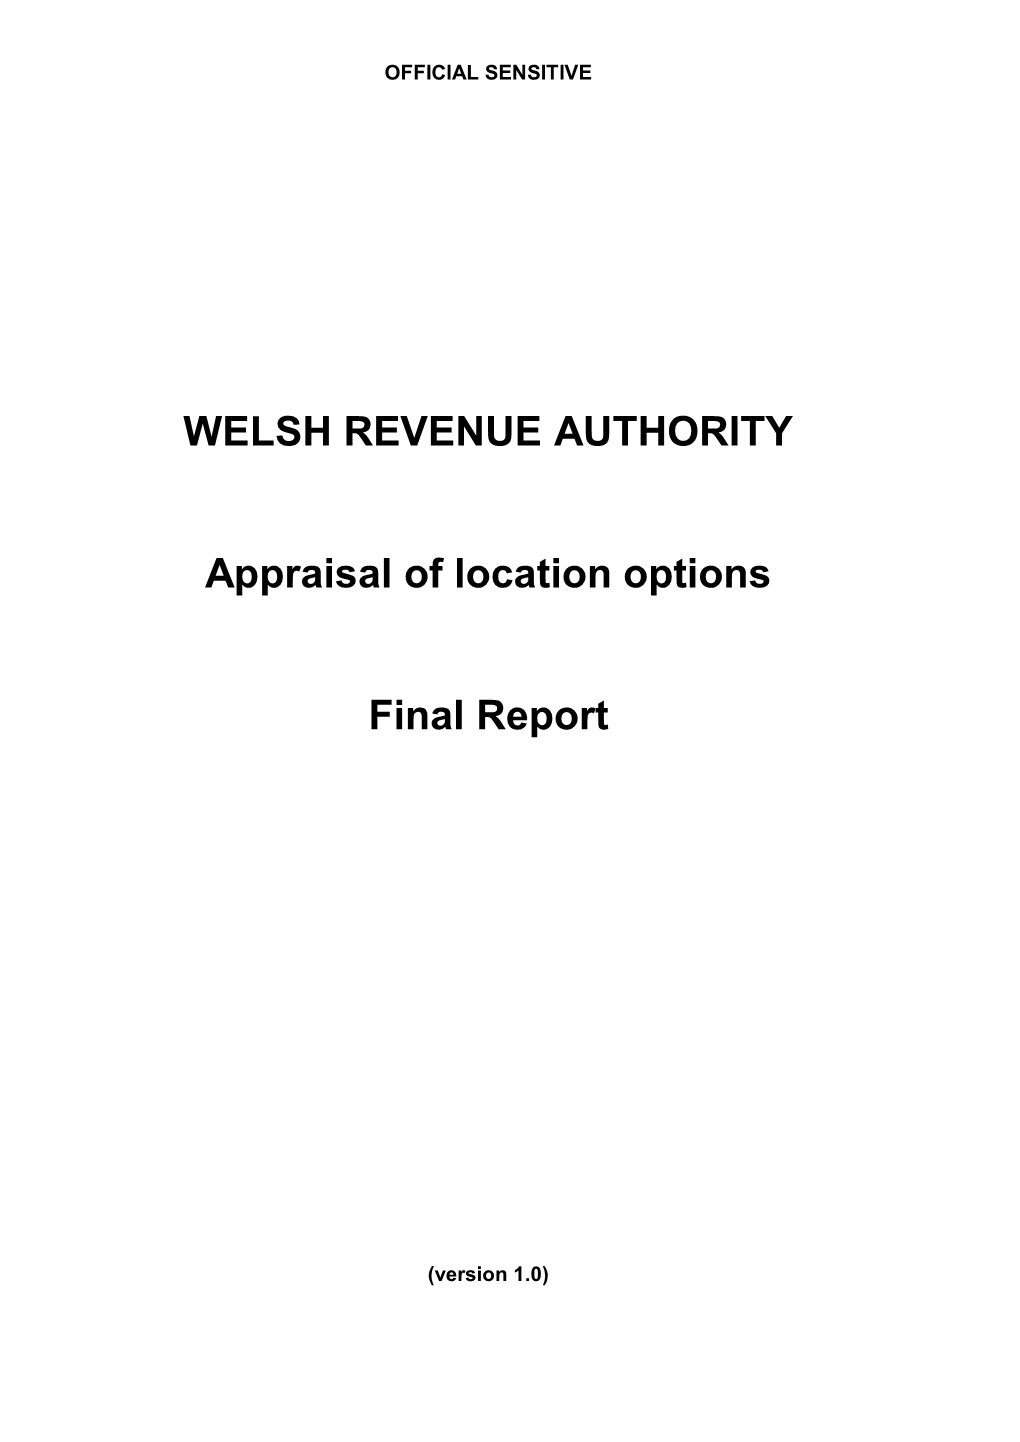 WELSH REVENUE AUTHORITY Appraisal of Location Options Final